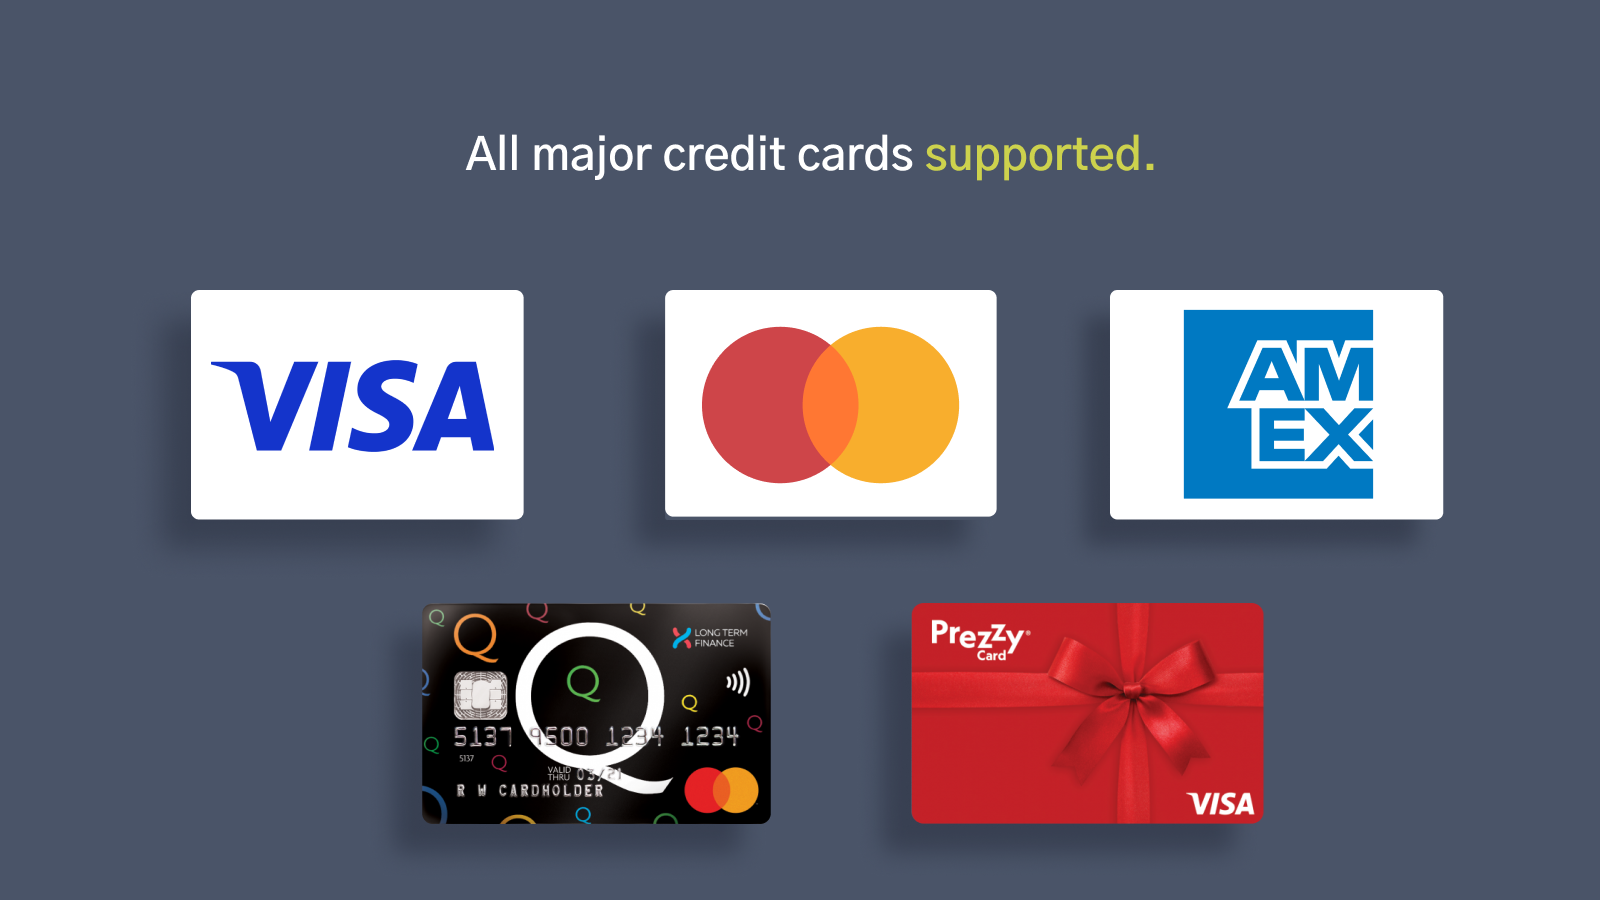 Customers can use all major cards with Paystation.